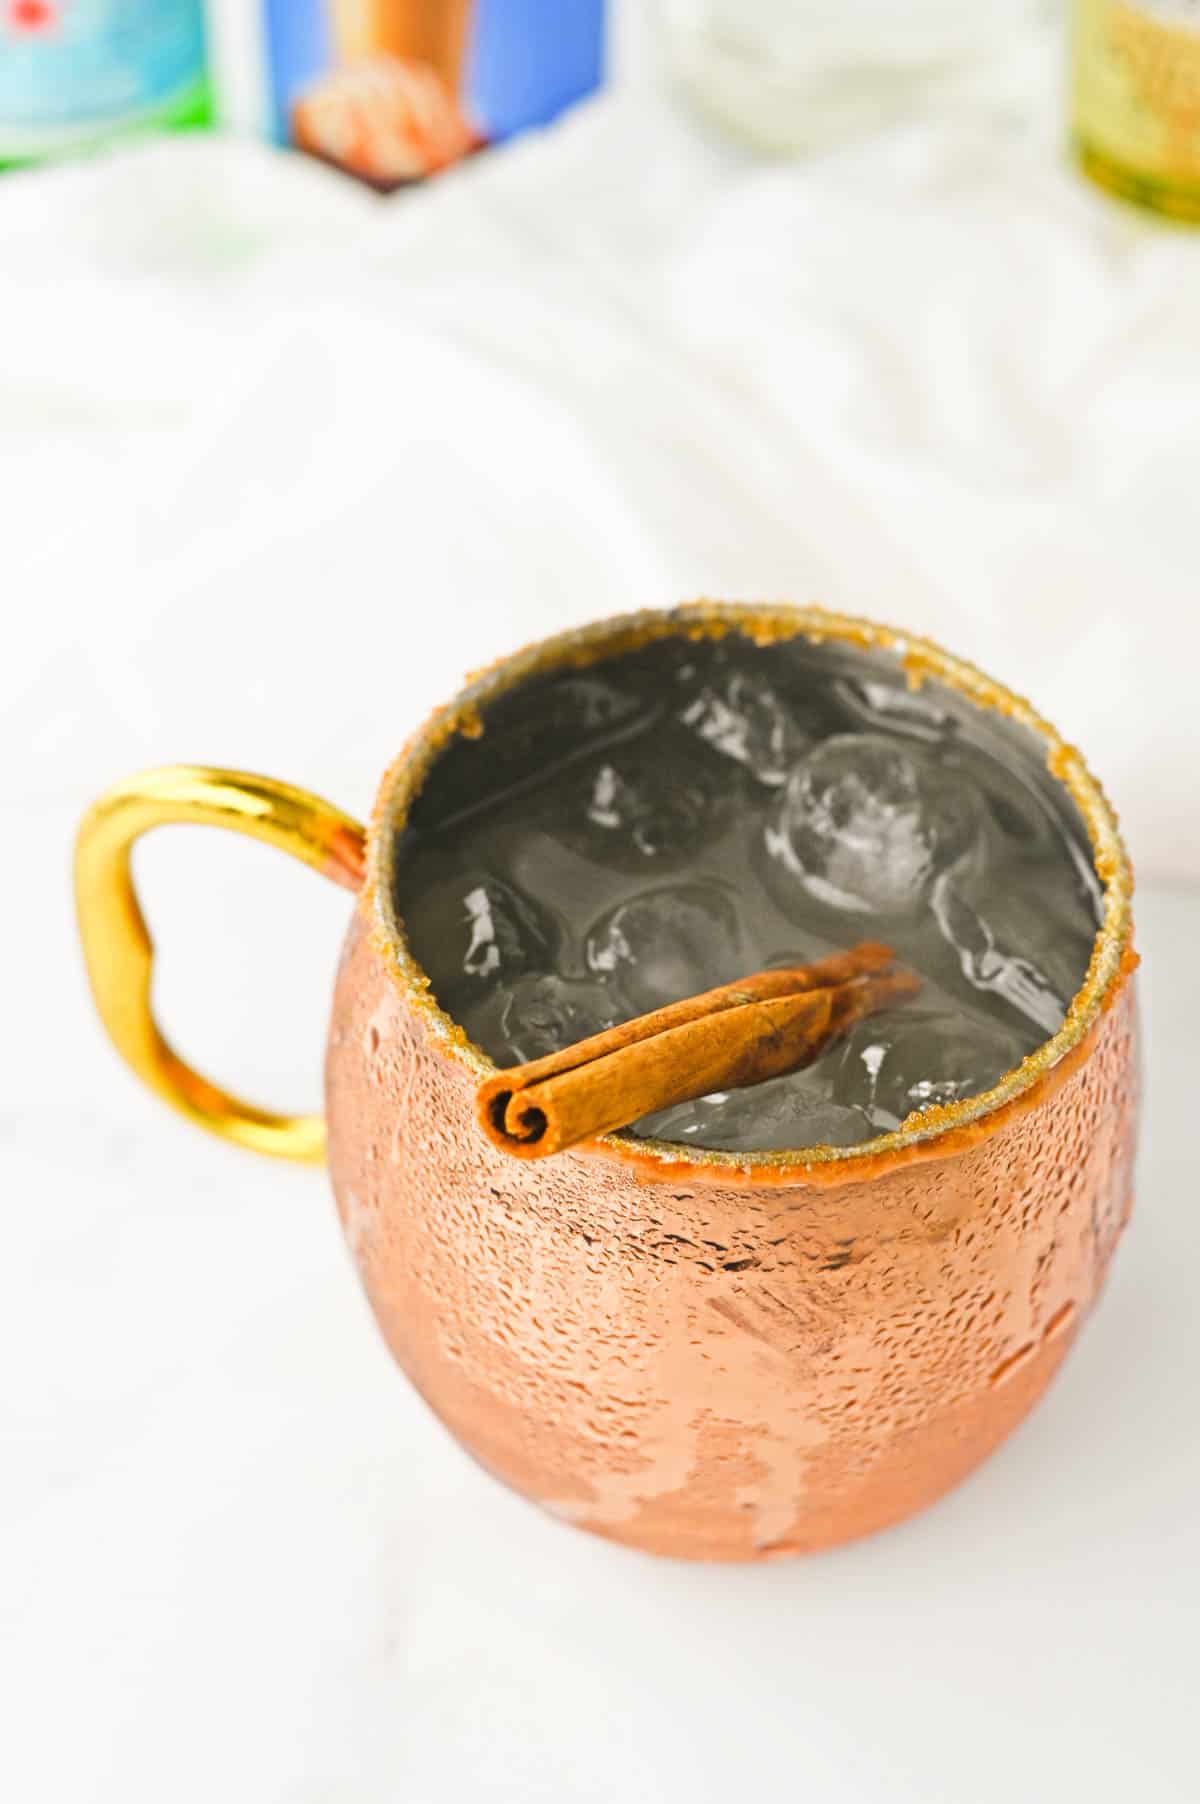 Moscow Mule in a copper mug with a salted caramel rim garnished with a cinnamon stick.